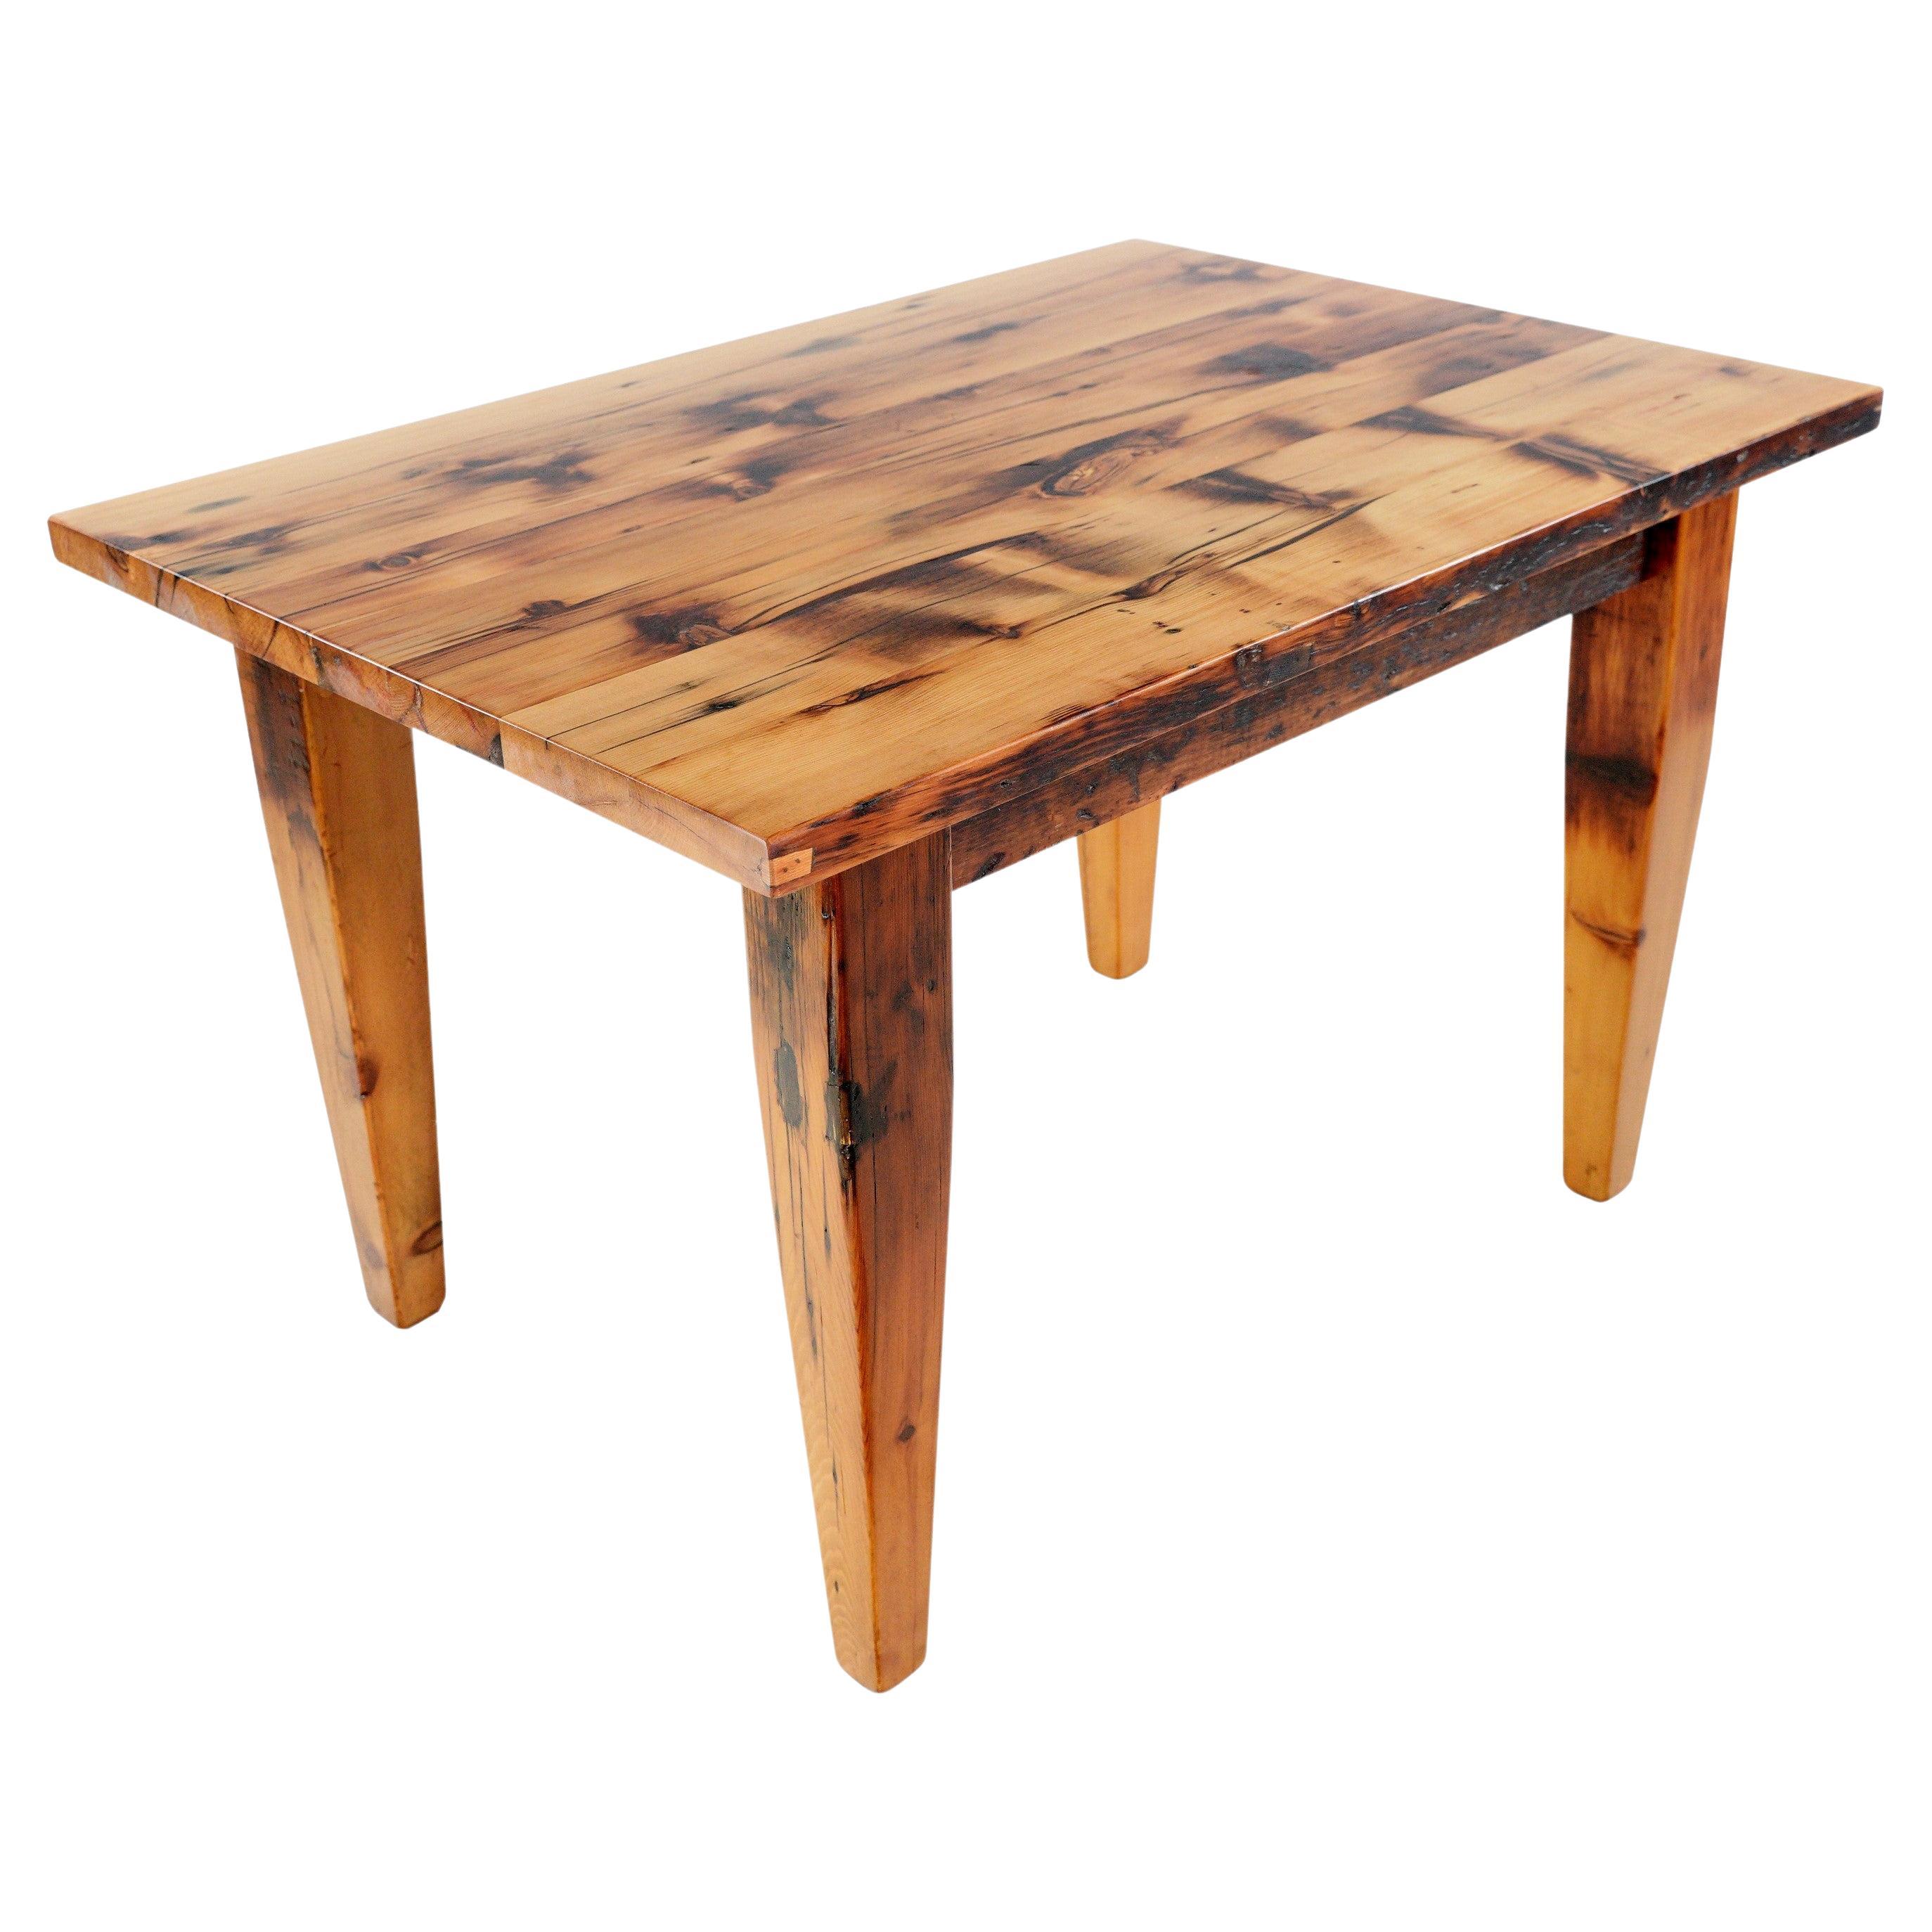 4 ft Natural Pine Tapered Legs Harvest Farm Table